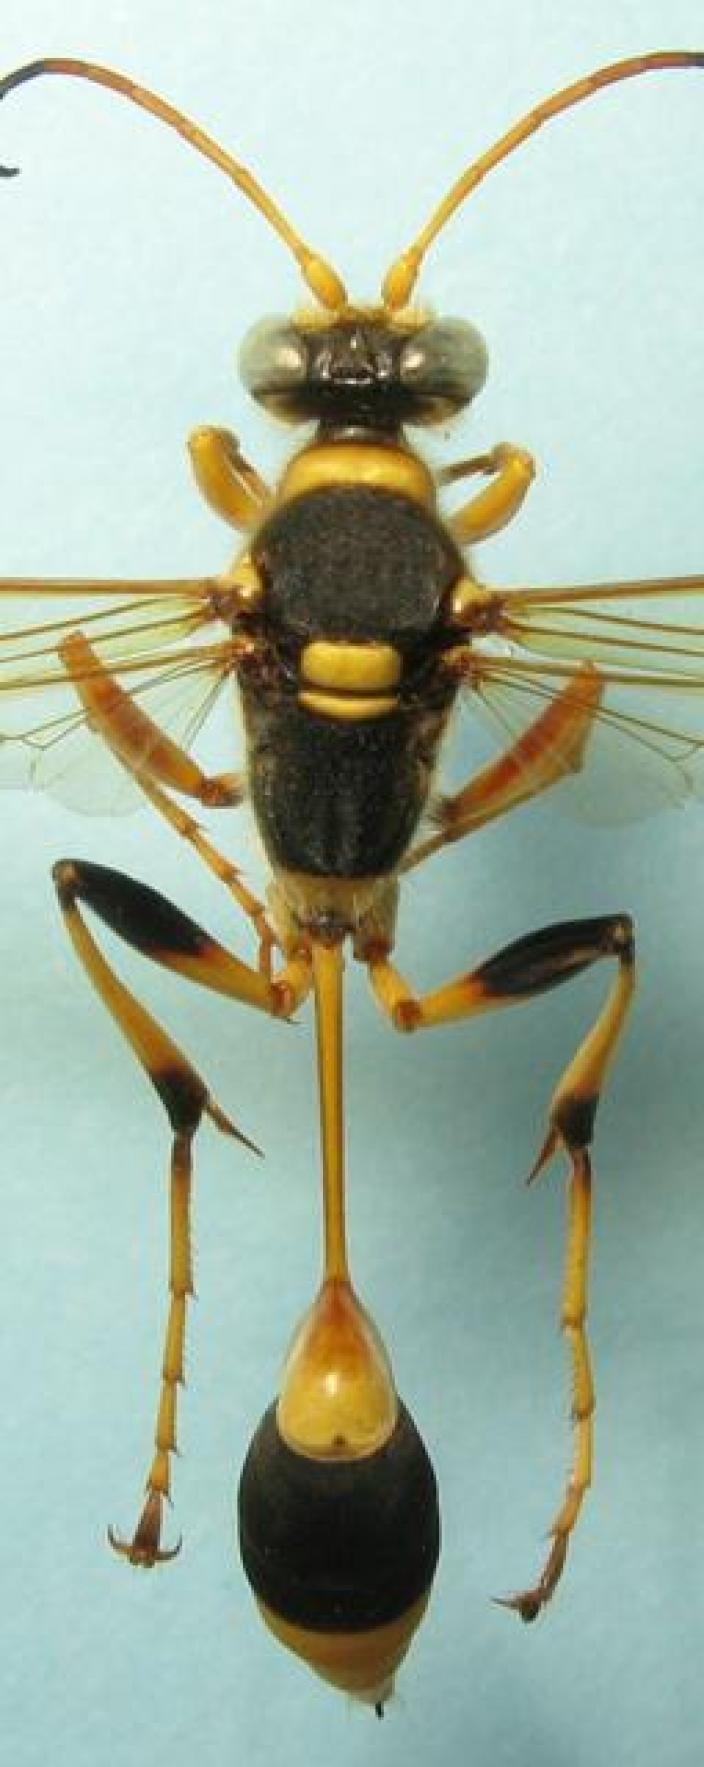 View of a mounted wasp specimen